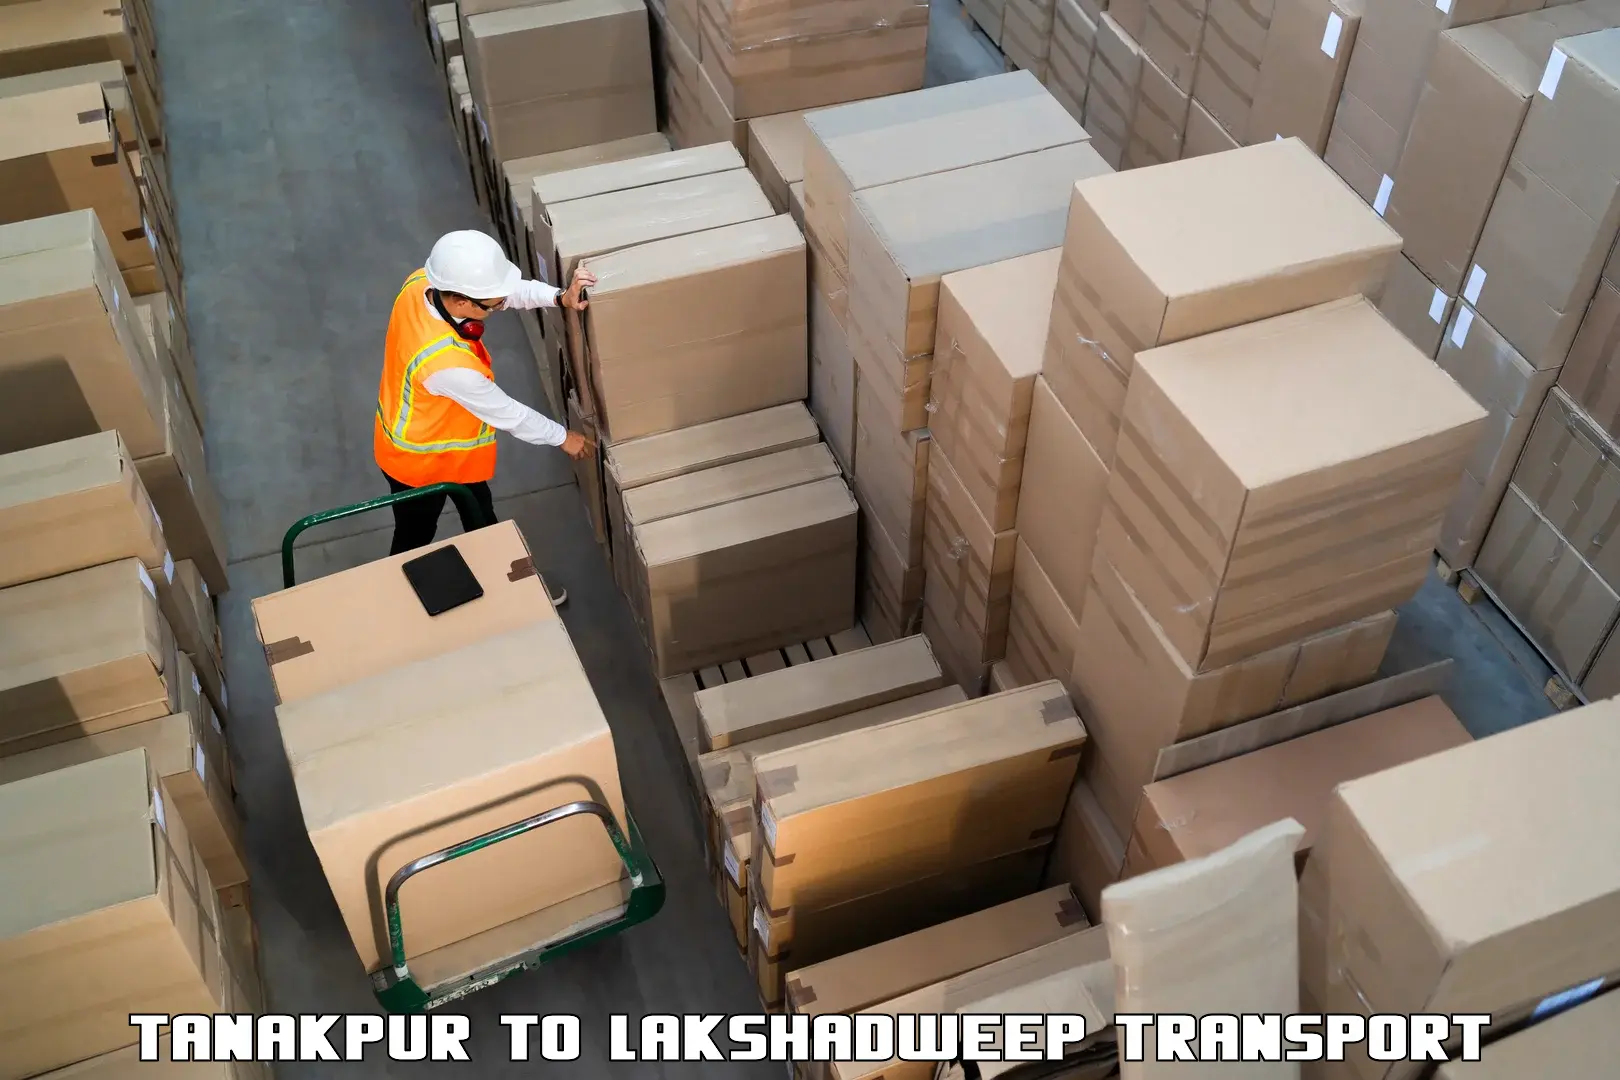 Transport shared services Tanakpur to Lakshadweep